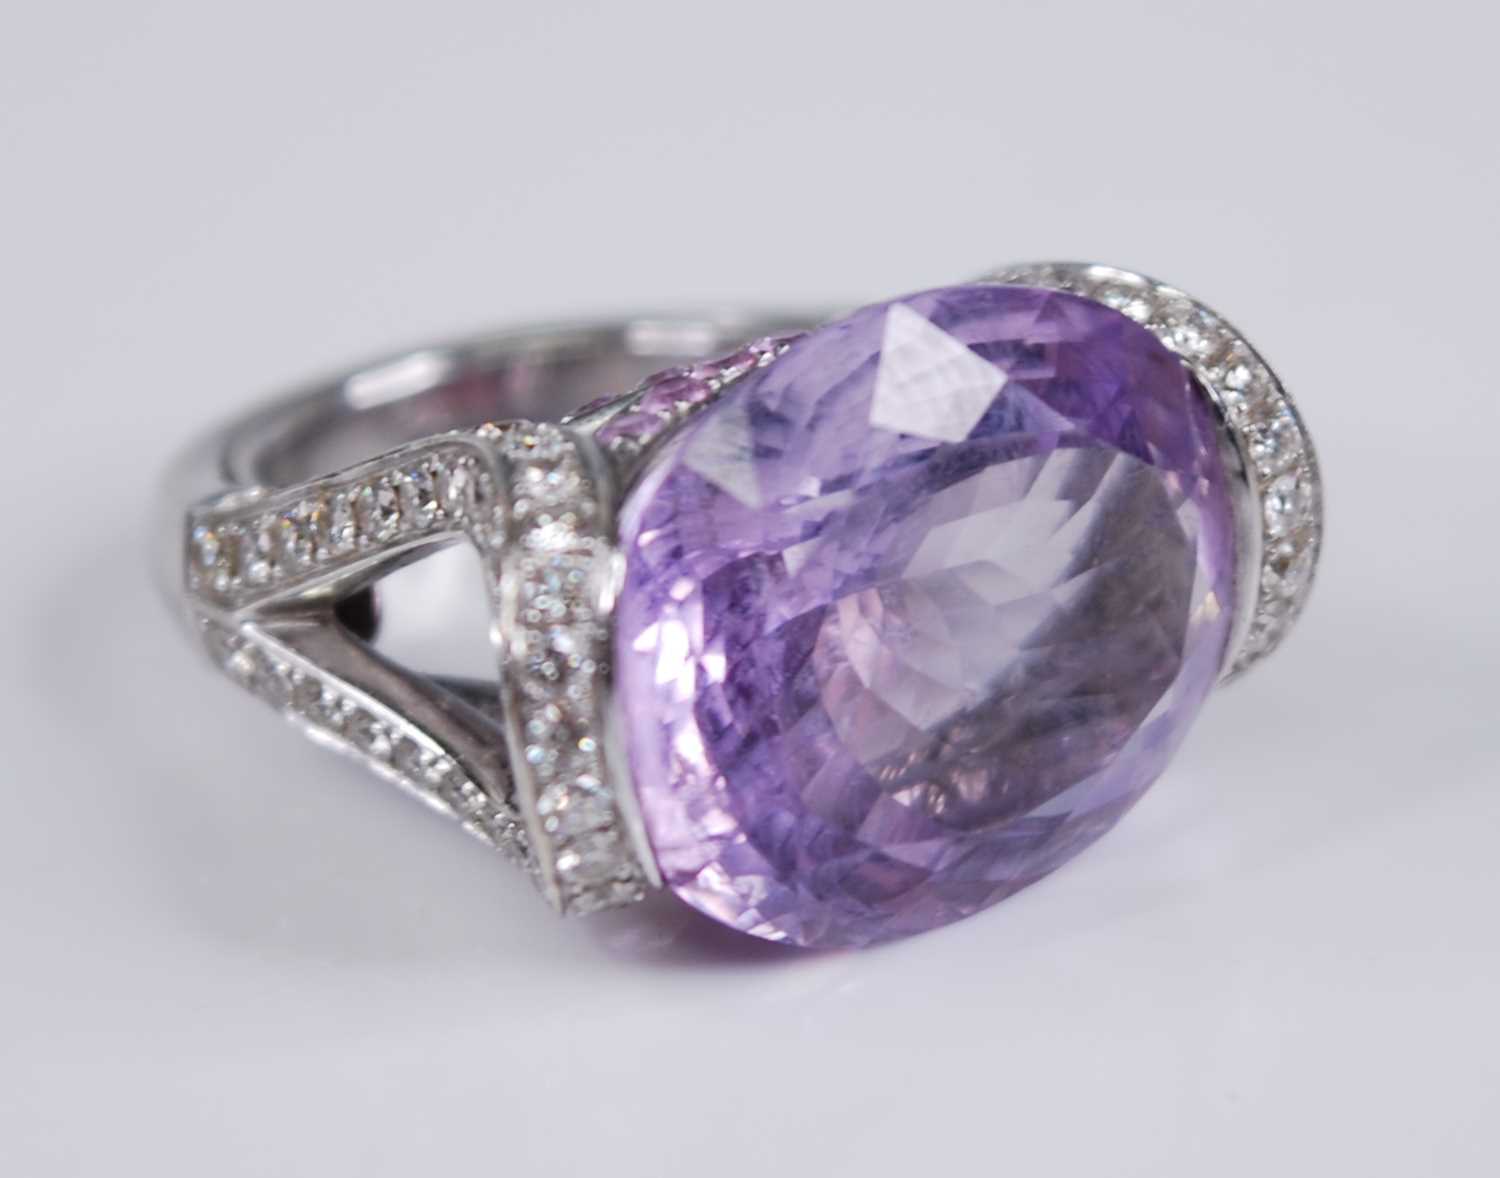 A contemporary French 18ct white gold, amethyst and diamond dress ring, arranged as a large oval cut